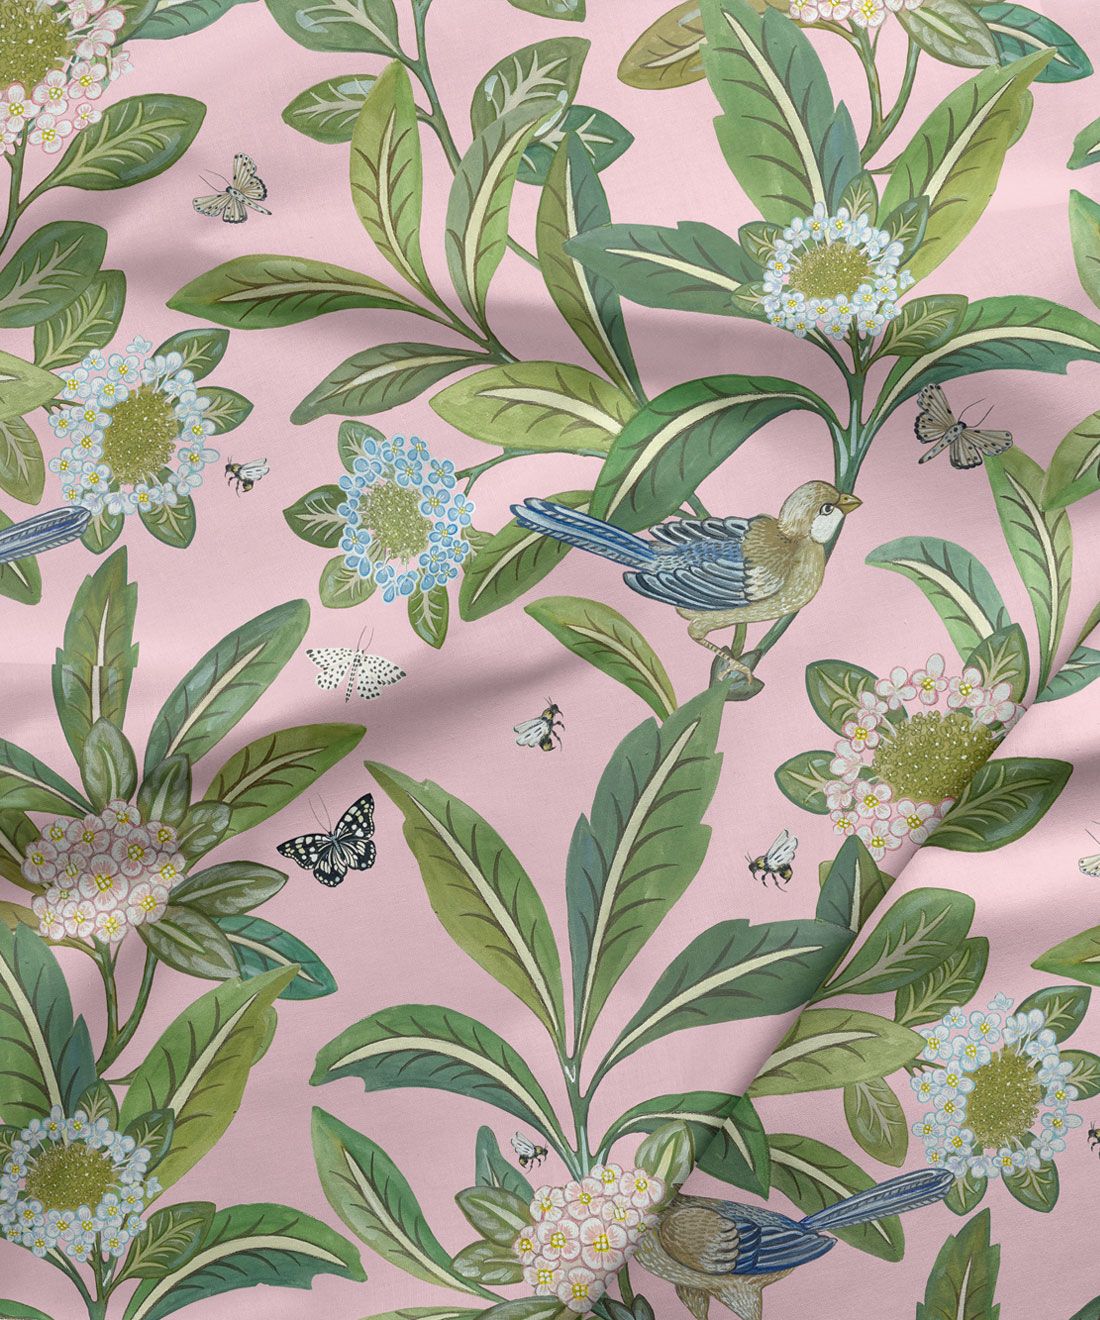 Summer Garden Fabric • Bethany Linz • Bird and Plant Fabric • Pink Upholstery Fabric